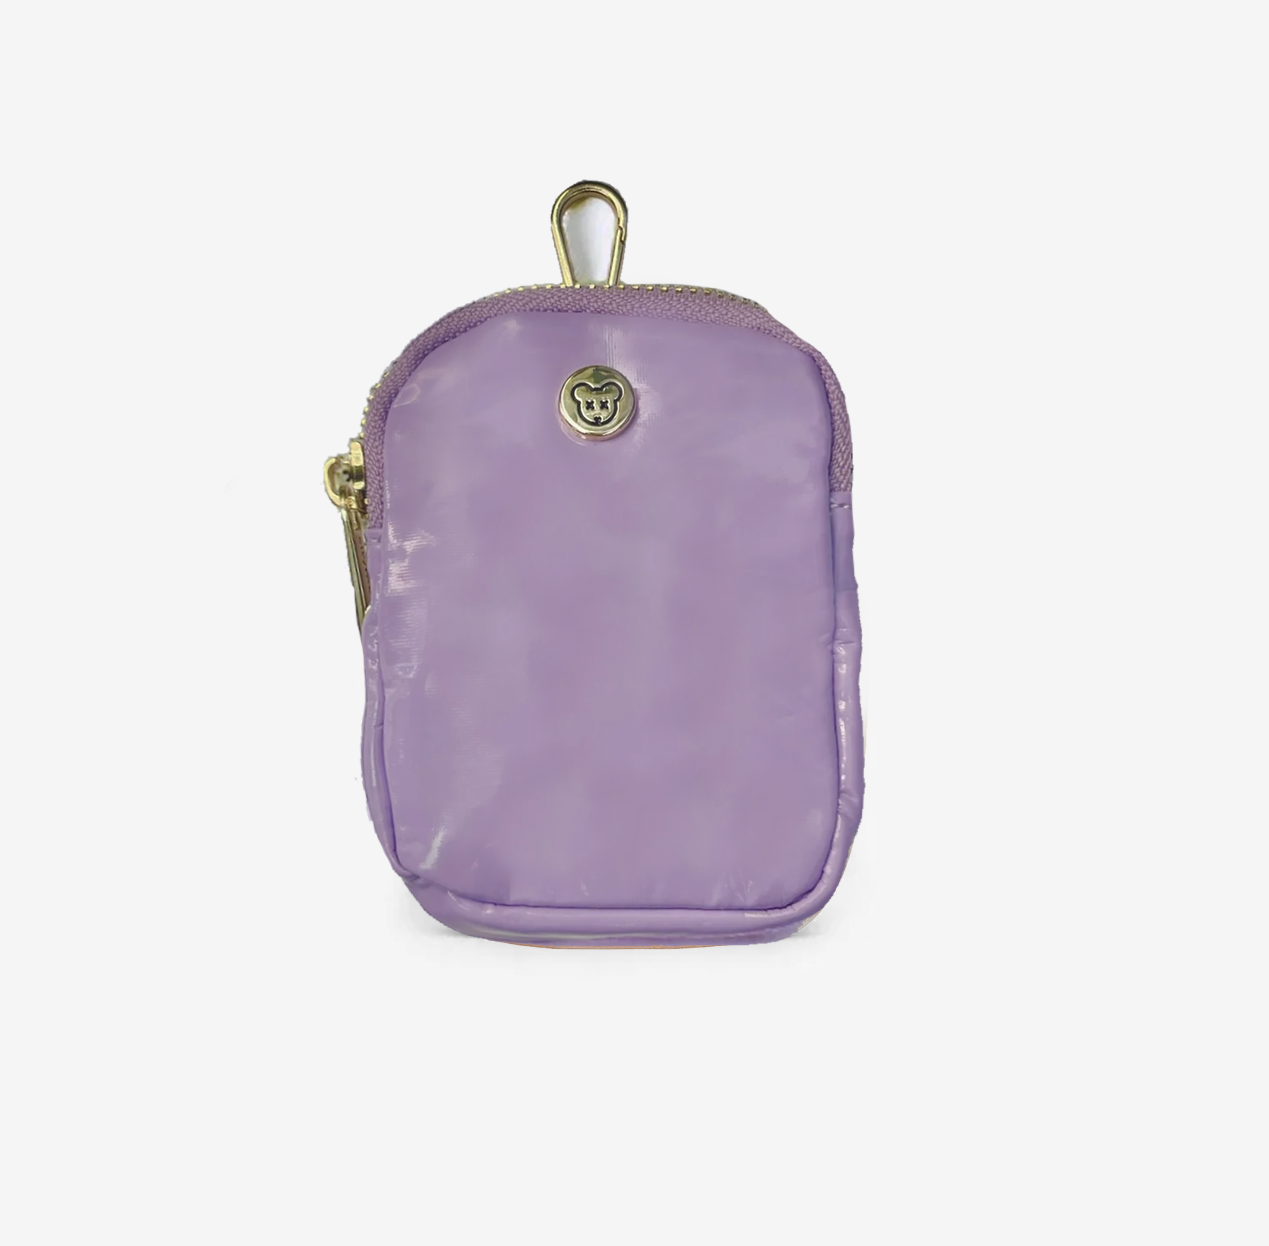 PACI POUCH - LAVENDER PUFF (limited edition)